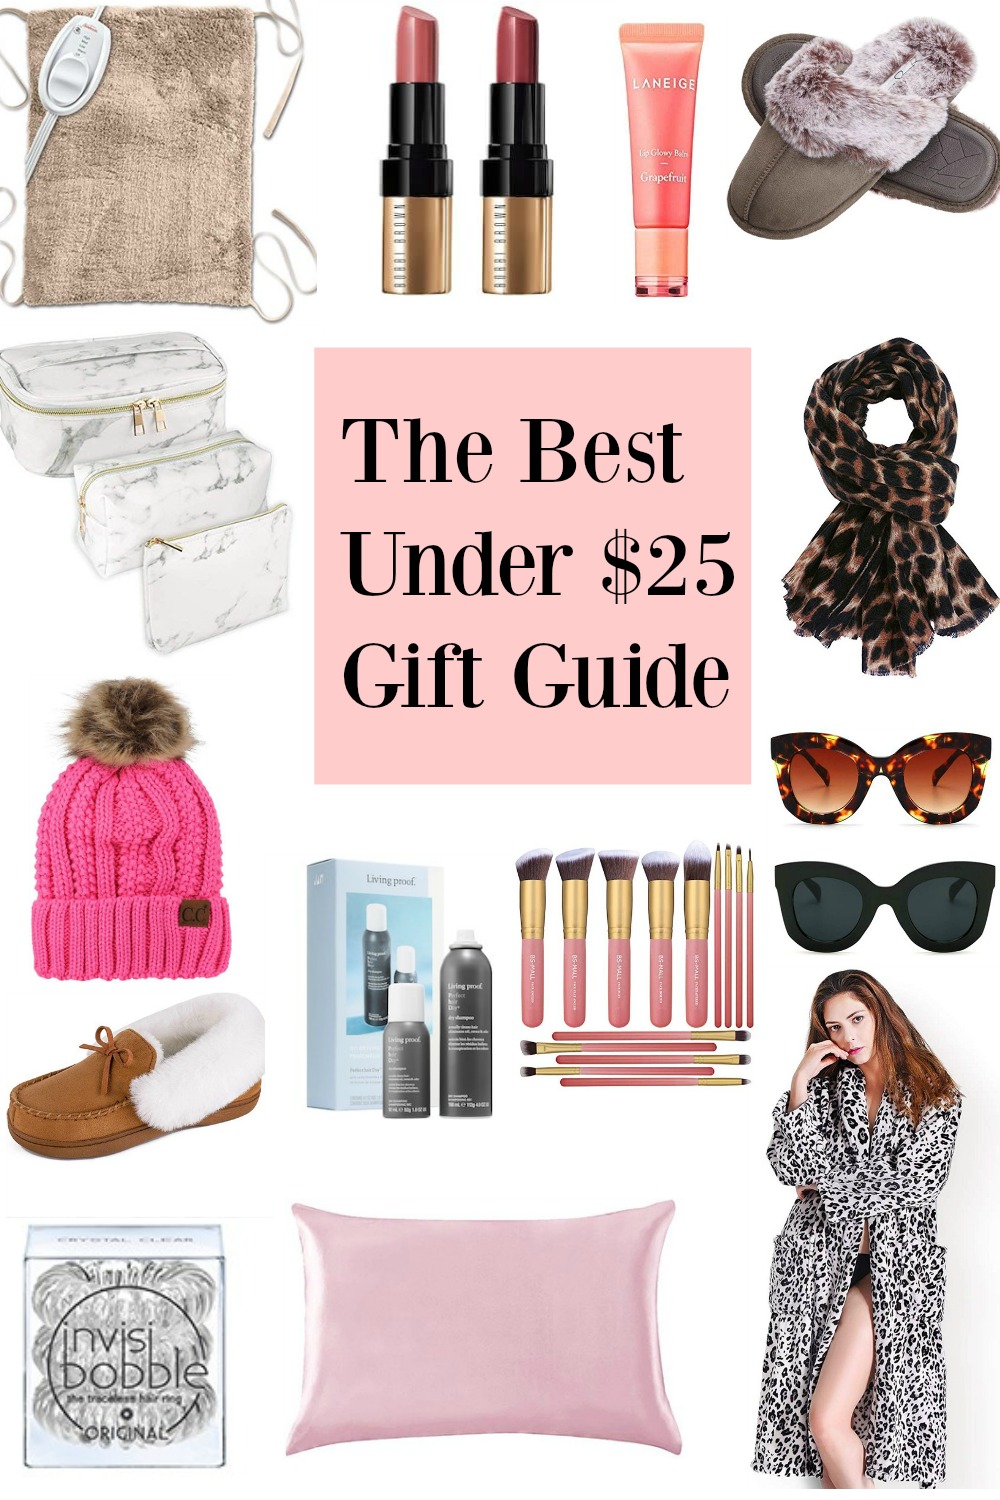 Cool Stuff to Buy for Under $25